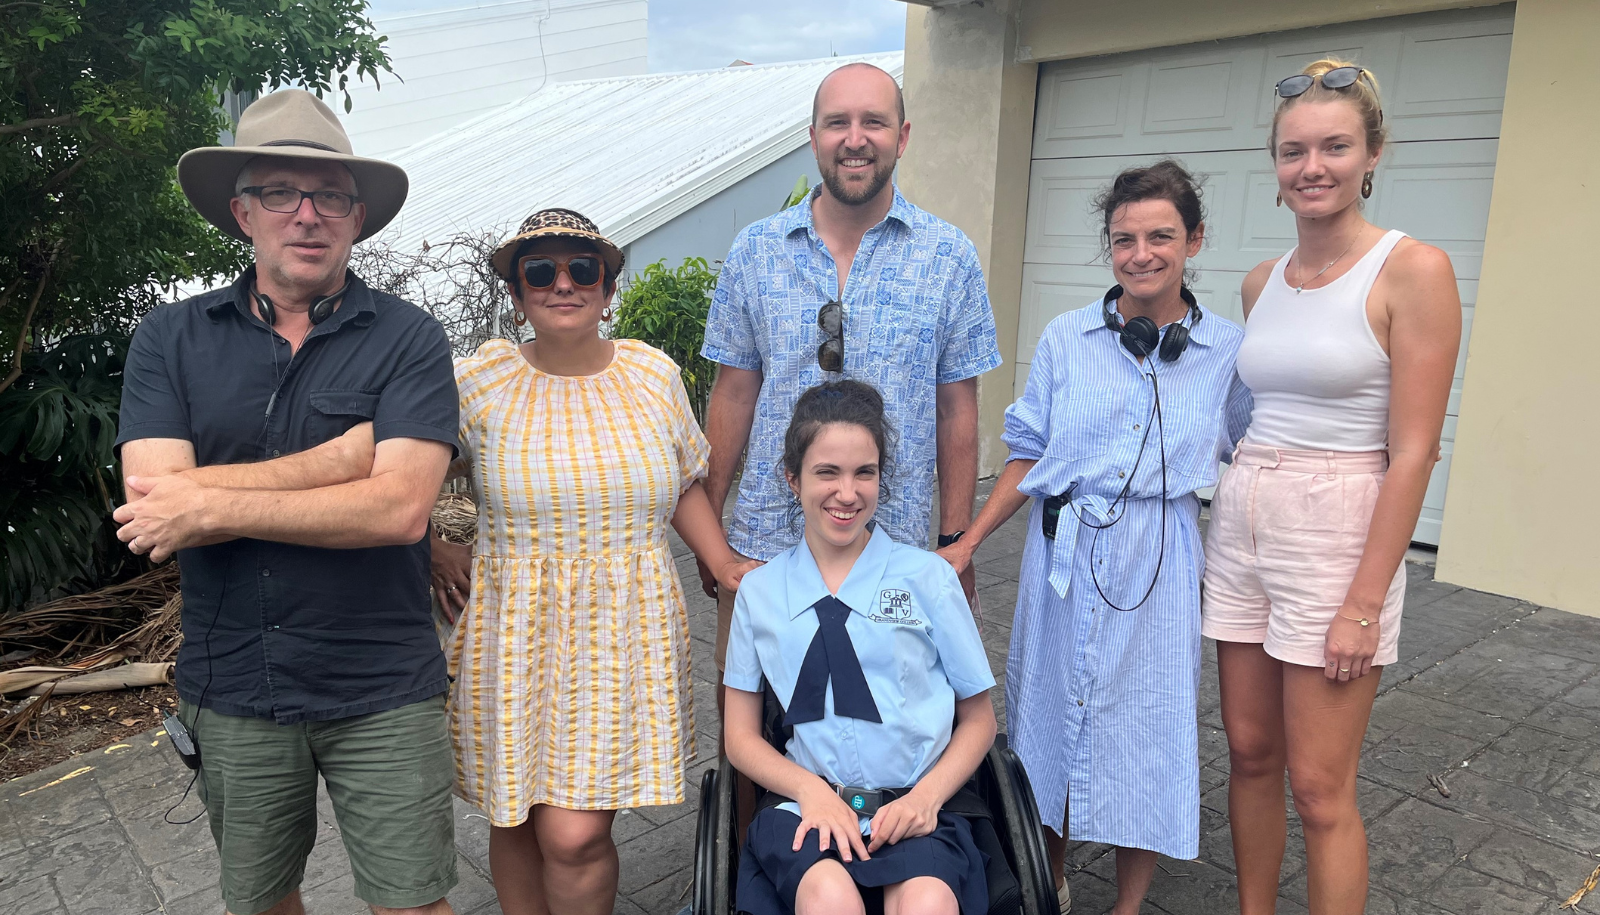 Still from the production set of ‘Audrey’. There are four women and two men in the picture. From left to right: Michael Wrenn (producer, Audrey), Lou Sanz (writer, Audrey), Hannah Diviney (actor), Zach Nielsen (CEO, Ascend Health Group), Natalie Bailey (director, Audrey), and Sasha Henstock (physiotherapist and carer, Ascend Health Group) 